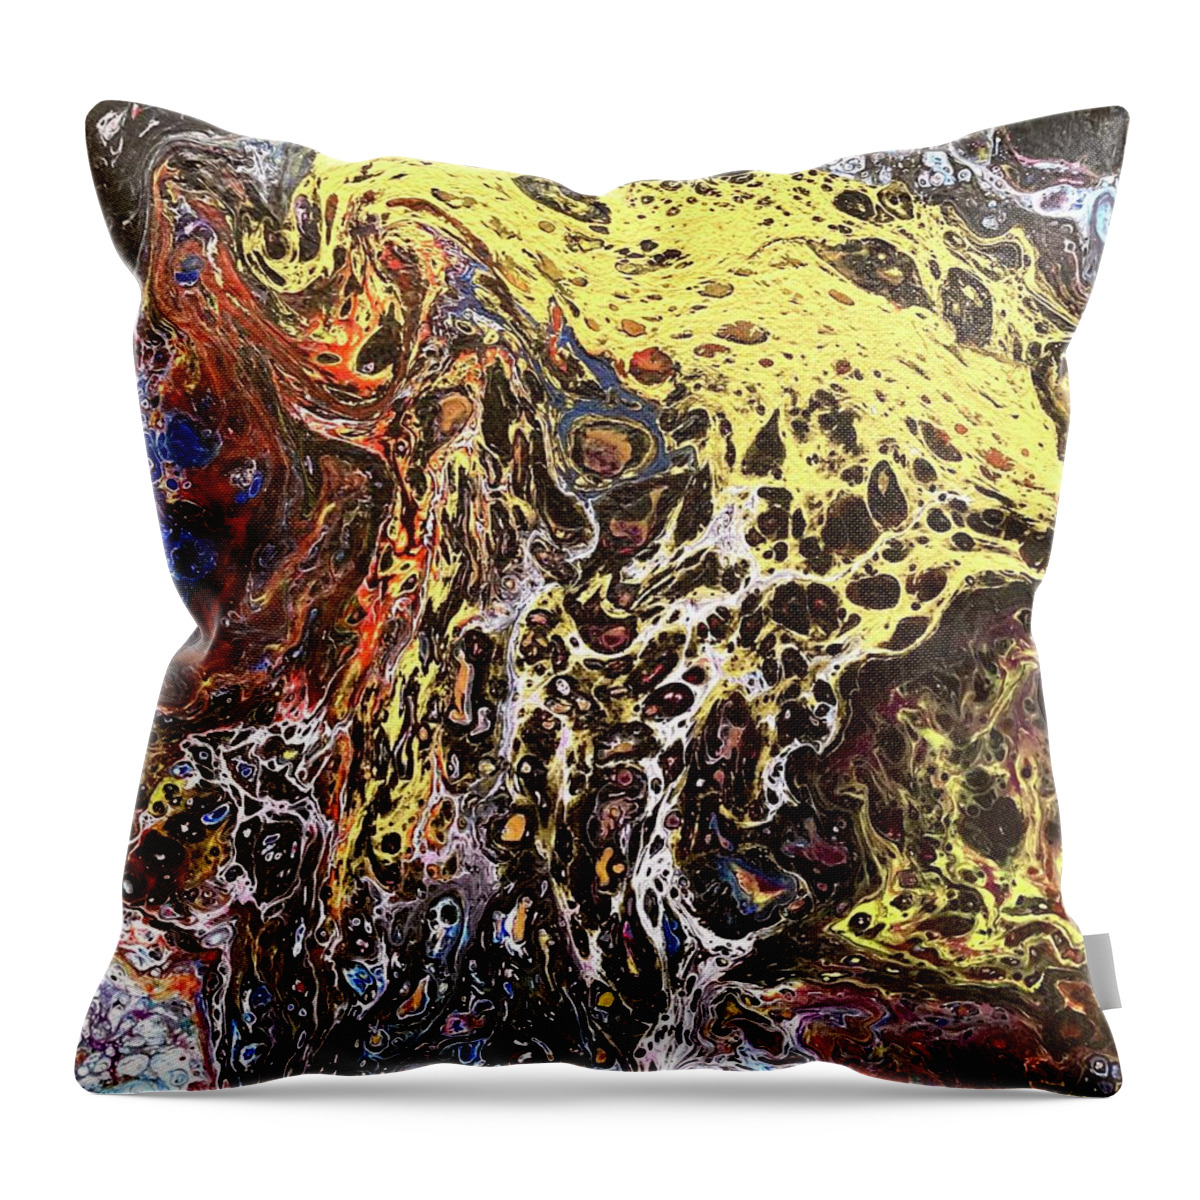 Celestial Throw Pillow featuring the painting Celestial Jellyfish by David Euler